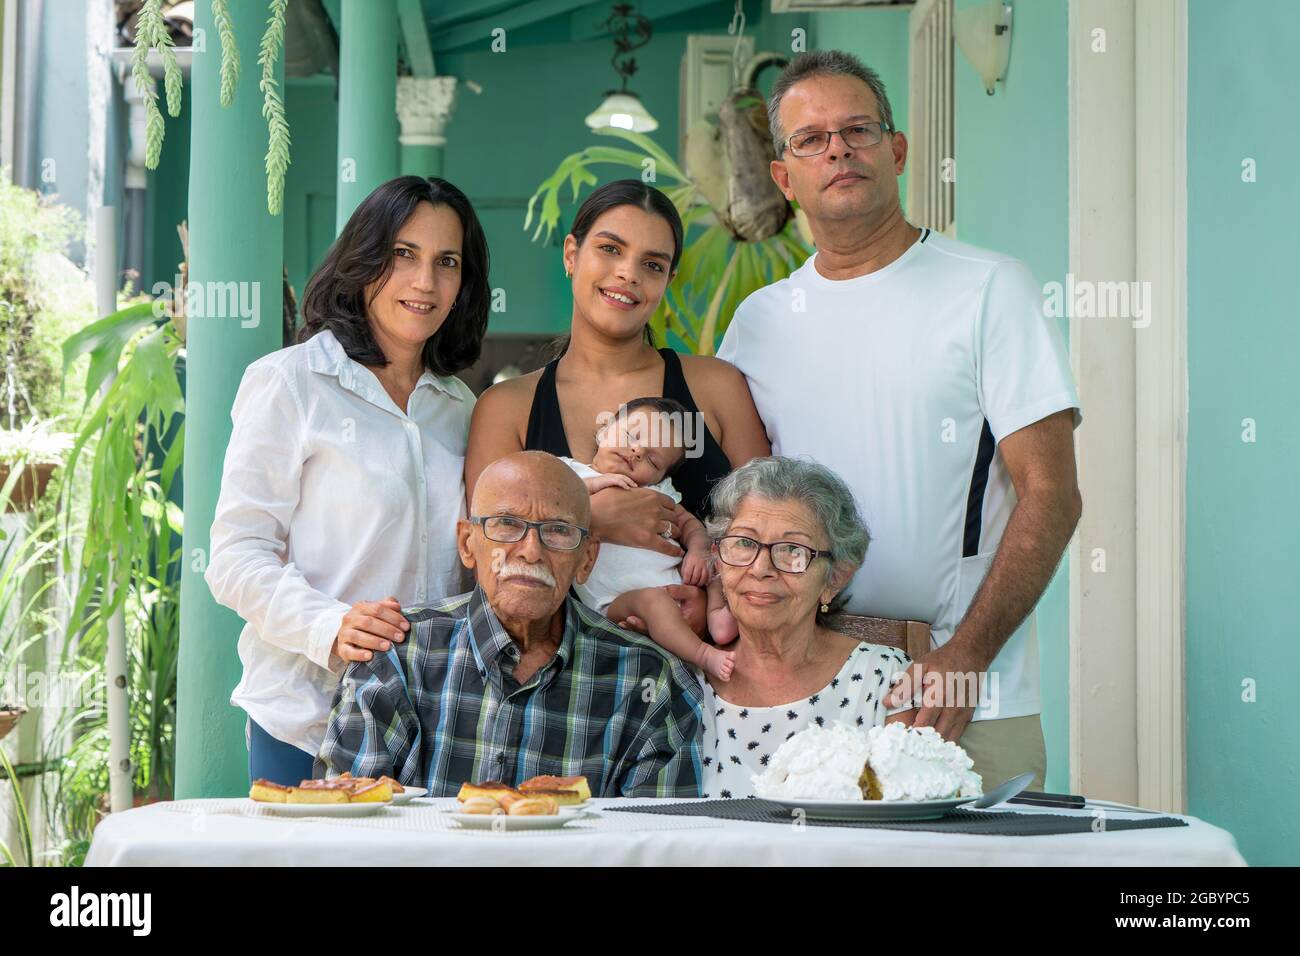 Elderly couple sitting. A man a woman and a young woman with a child in their arms standing behind the elderly couple Stock Photo